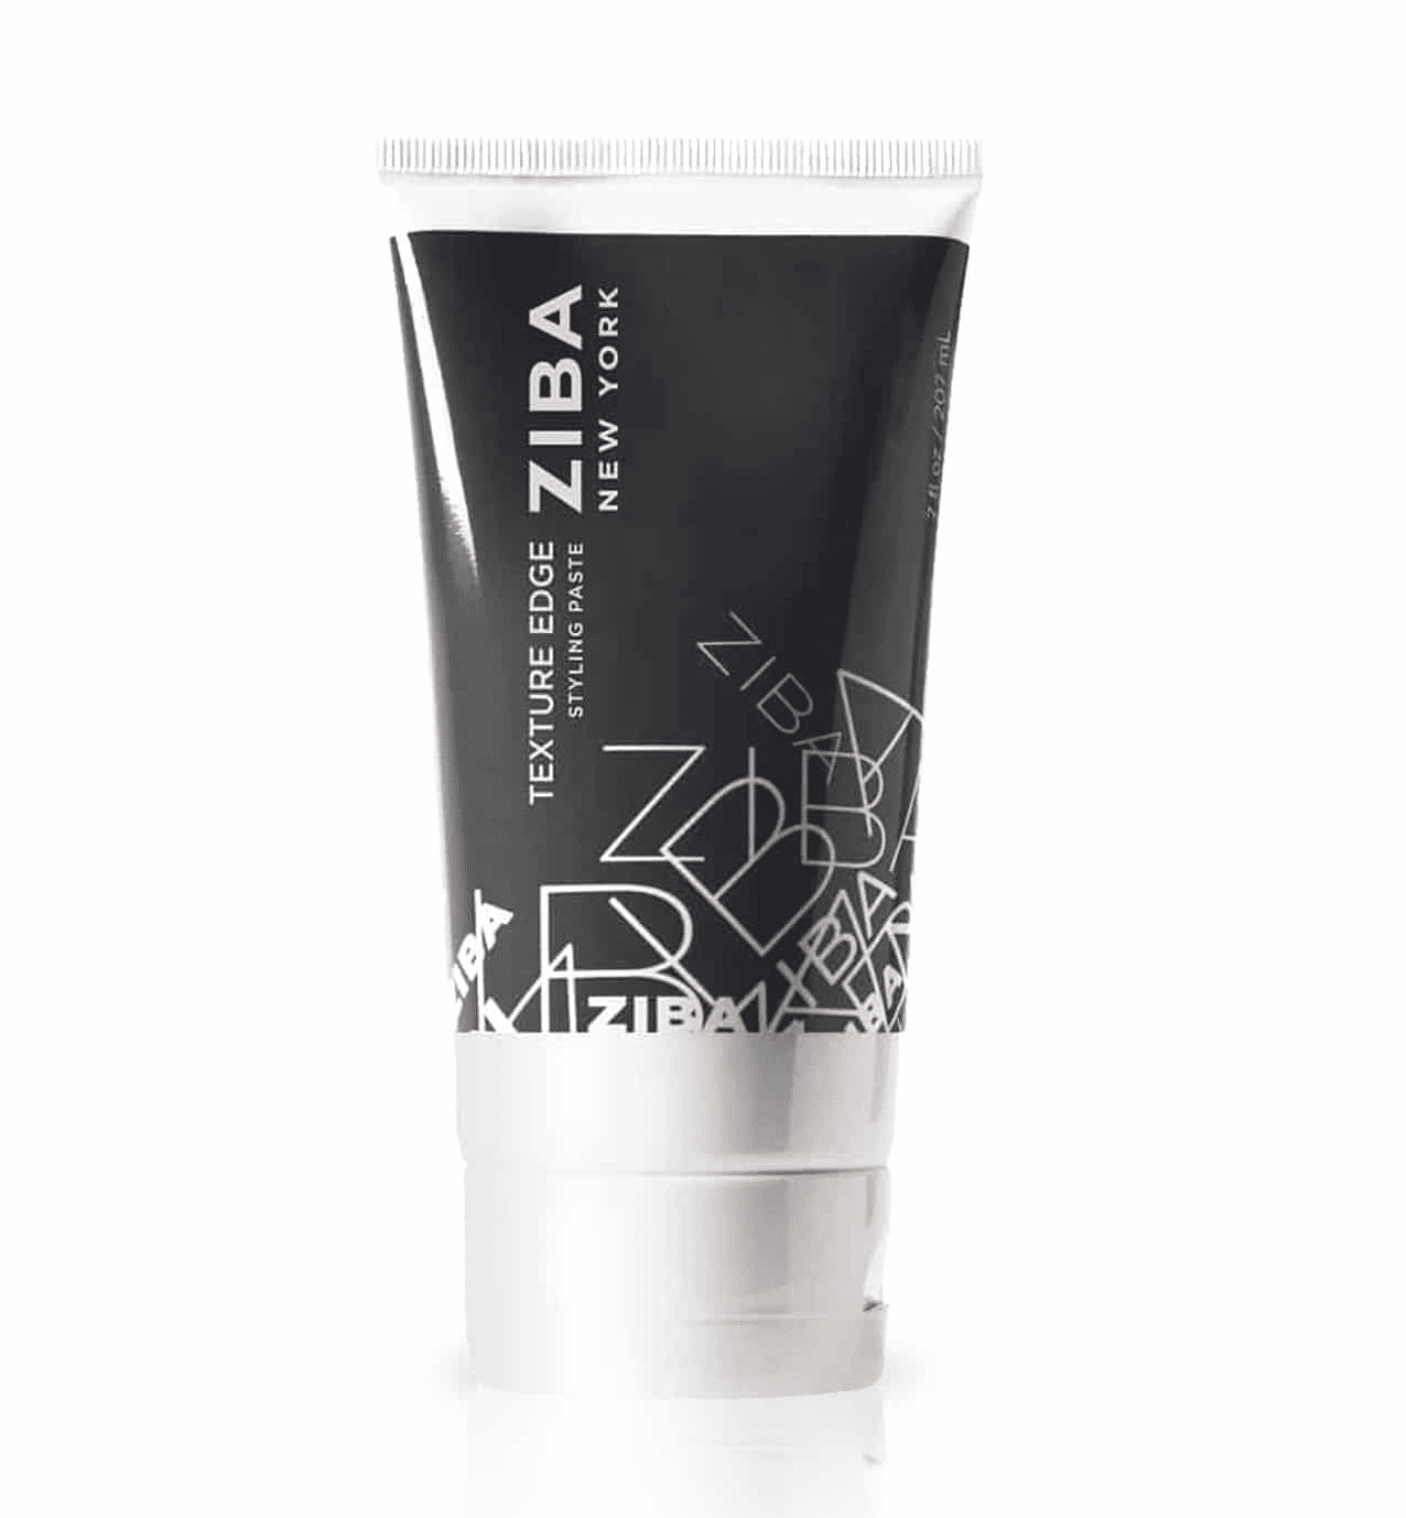 The Best Hair Styling Products for Men, Salon Ziba